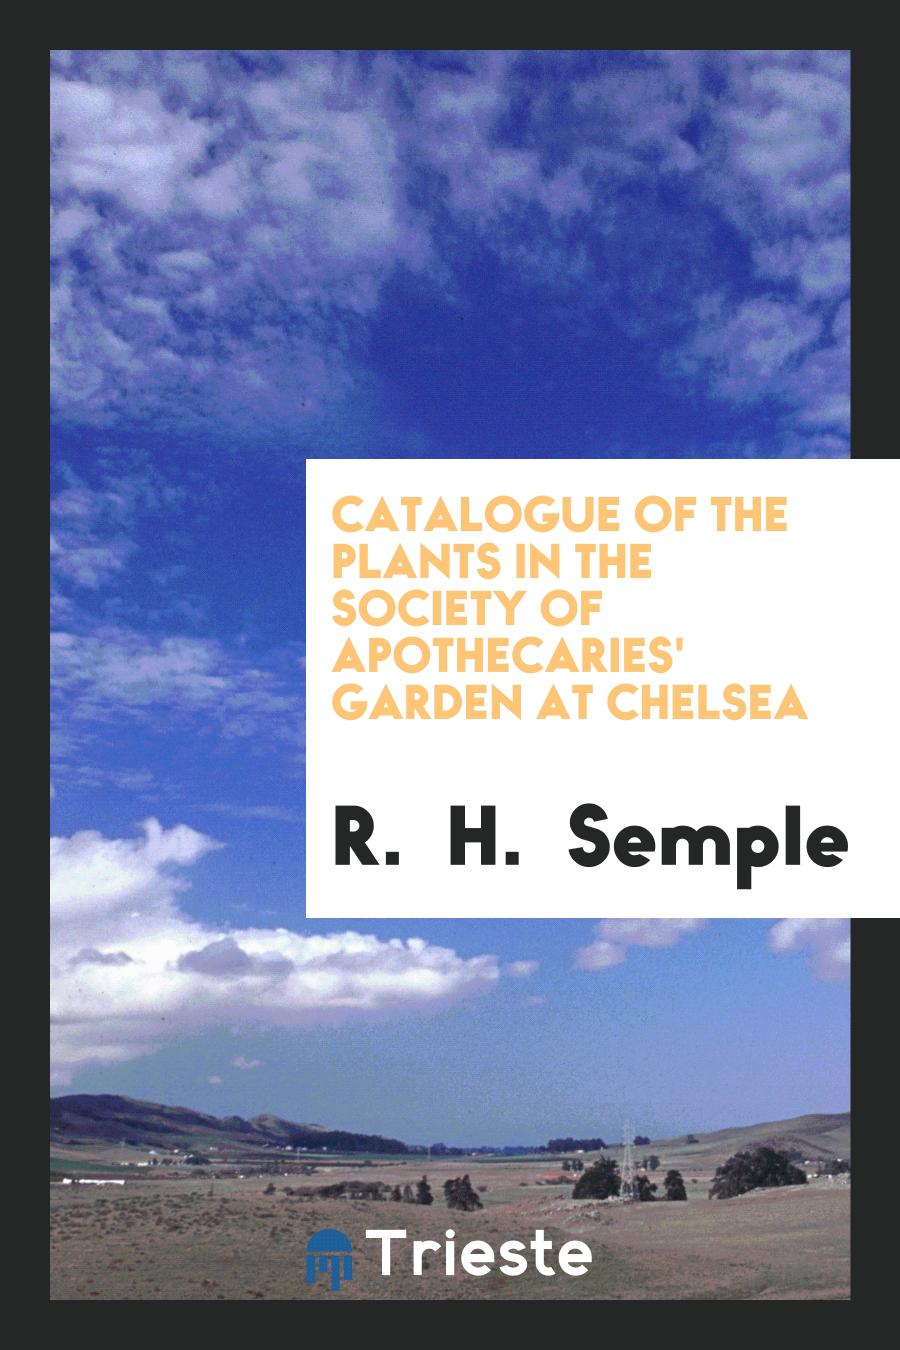 Catalogue of the Plants in the Society of Apothecaries' Garden at Chelsea